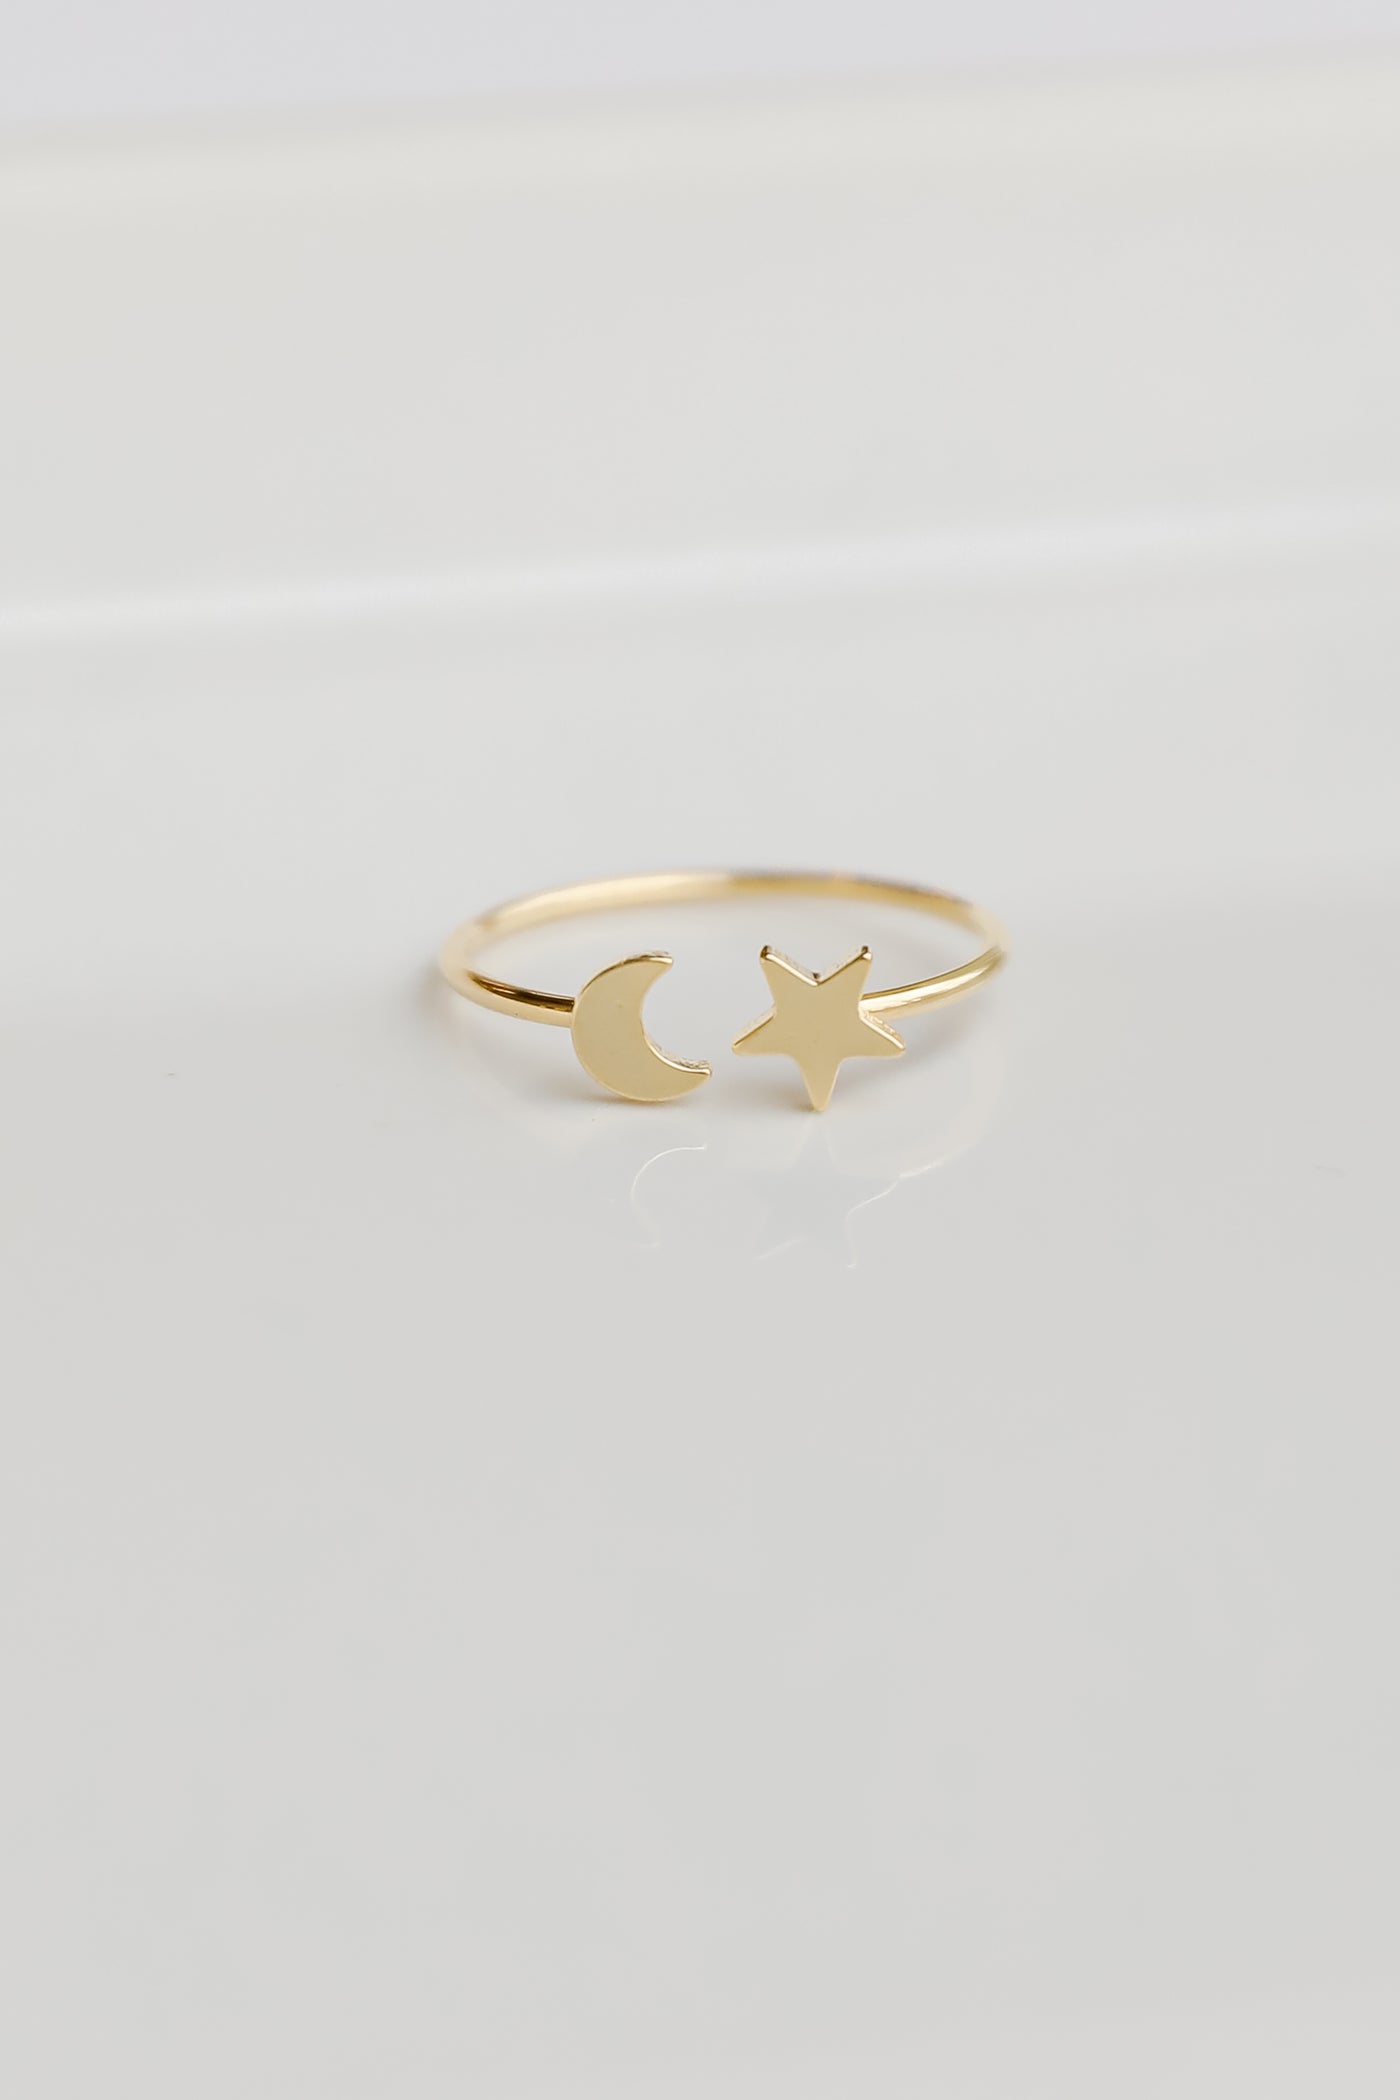 Gold Star + Moon Ring from dress up